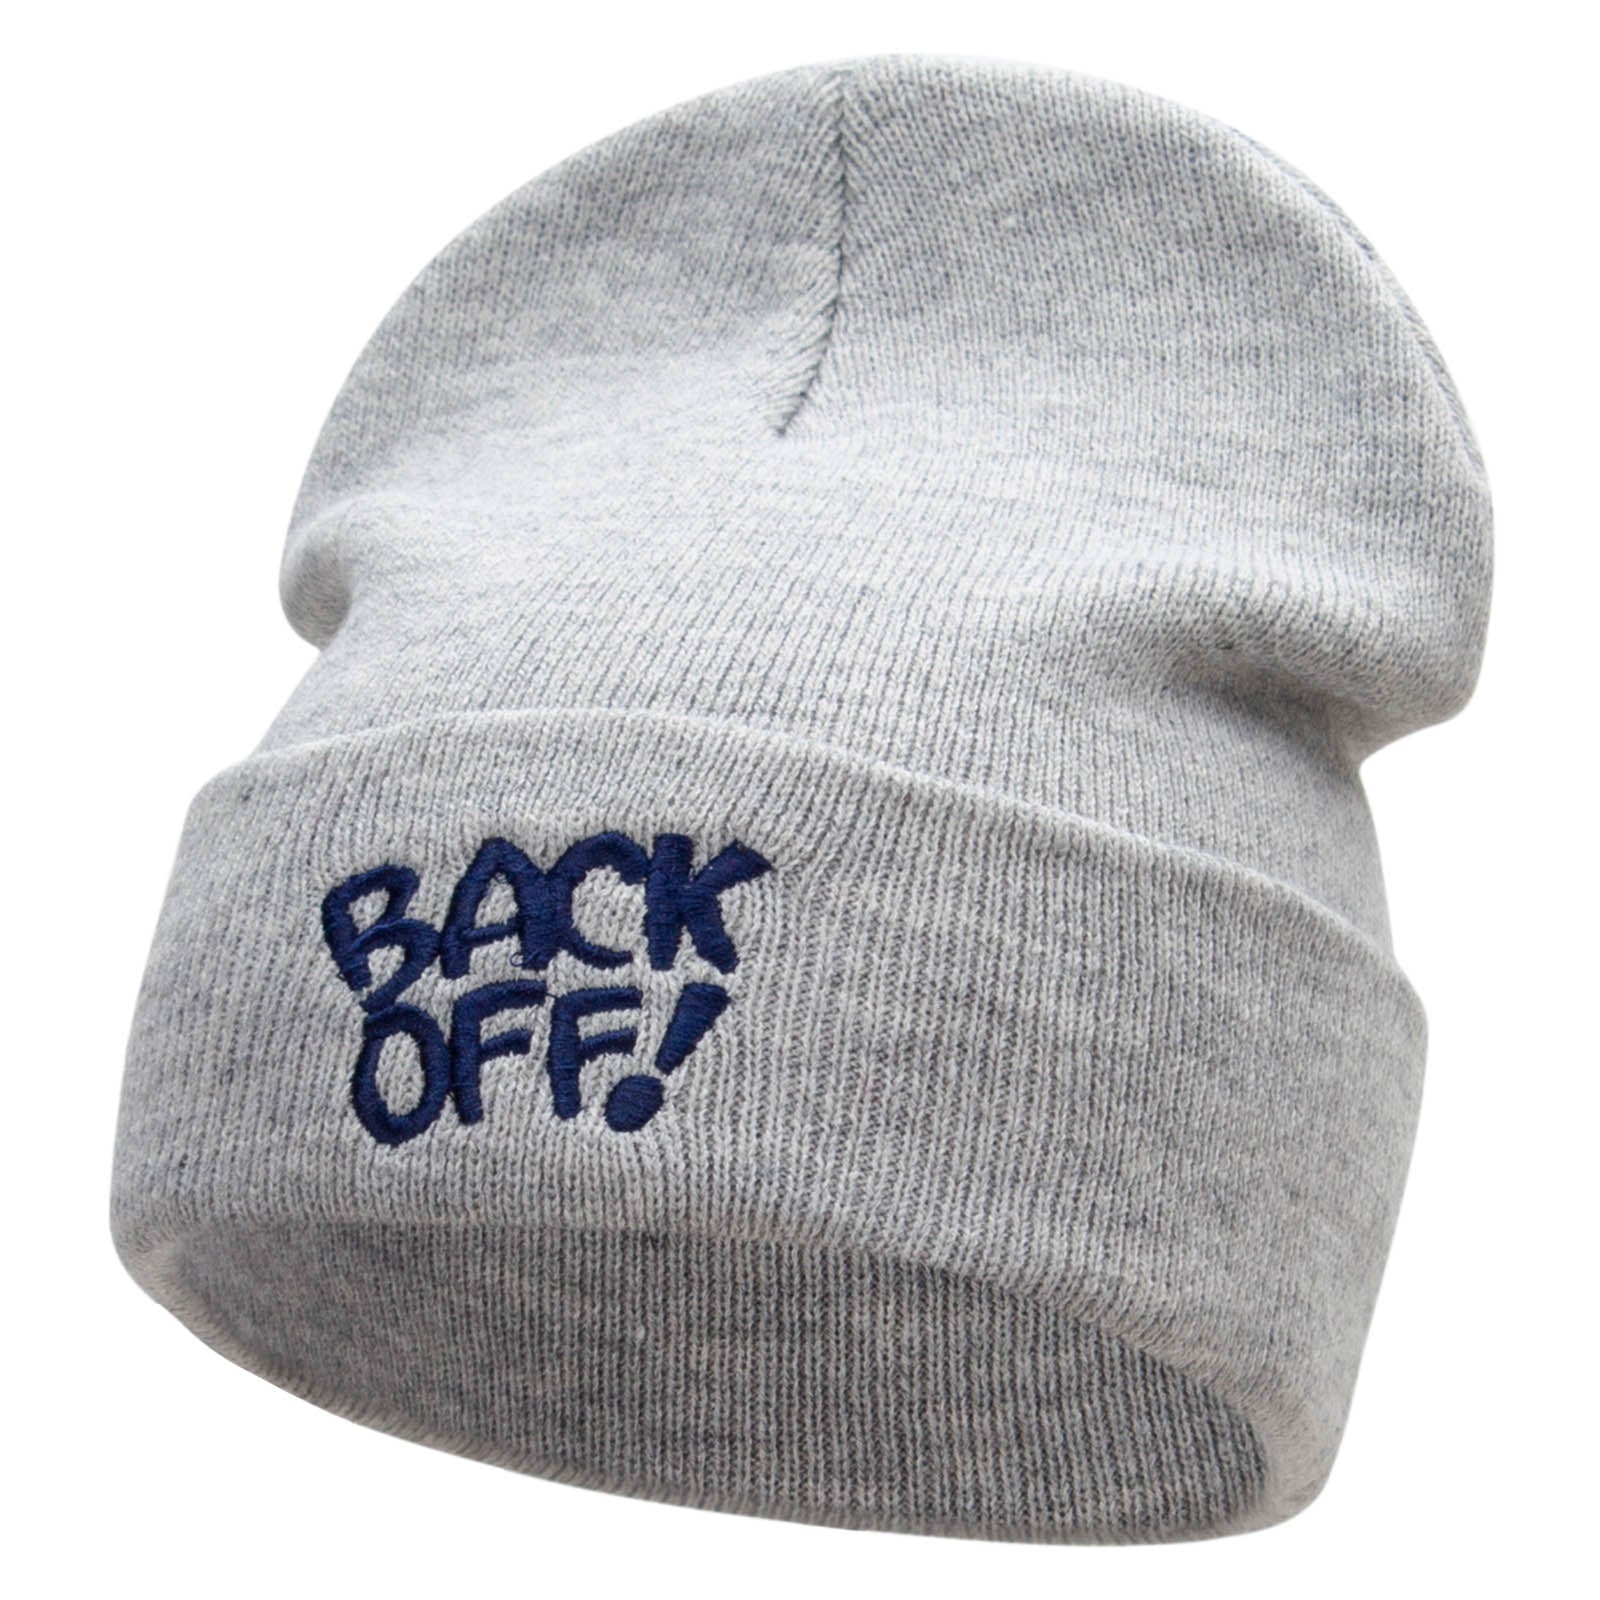 Back Off Phrase Embroidered 12 Inch Long Knitted Beanie - Heather Grey OSFM